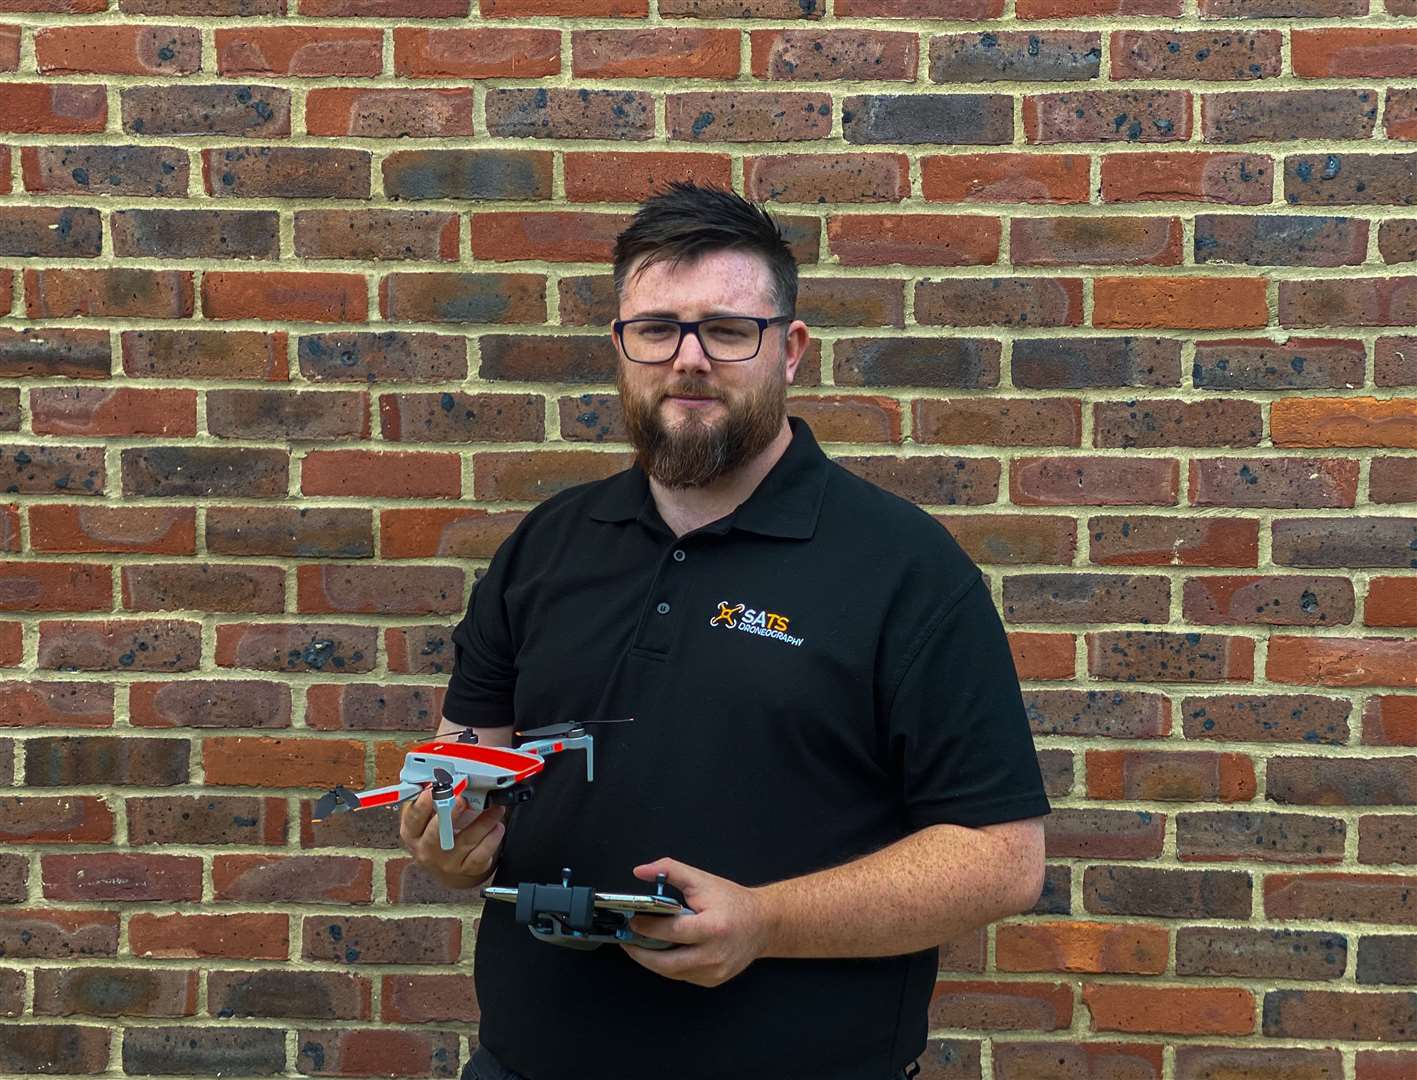 Sheppey businessman Toby Sprake from SATS Droneography has created a calendar for 2022 to raise funds for Curly's community farm at Bayview